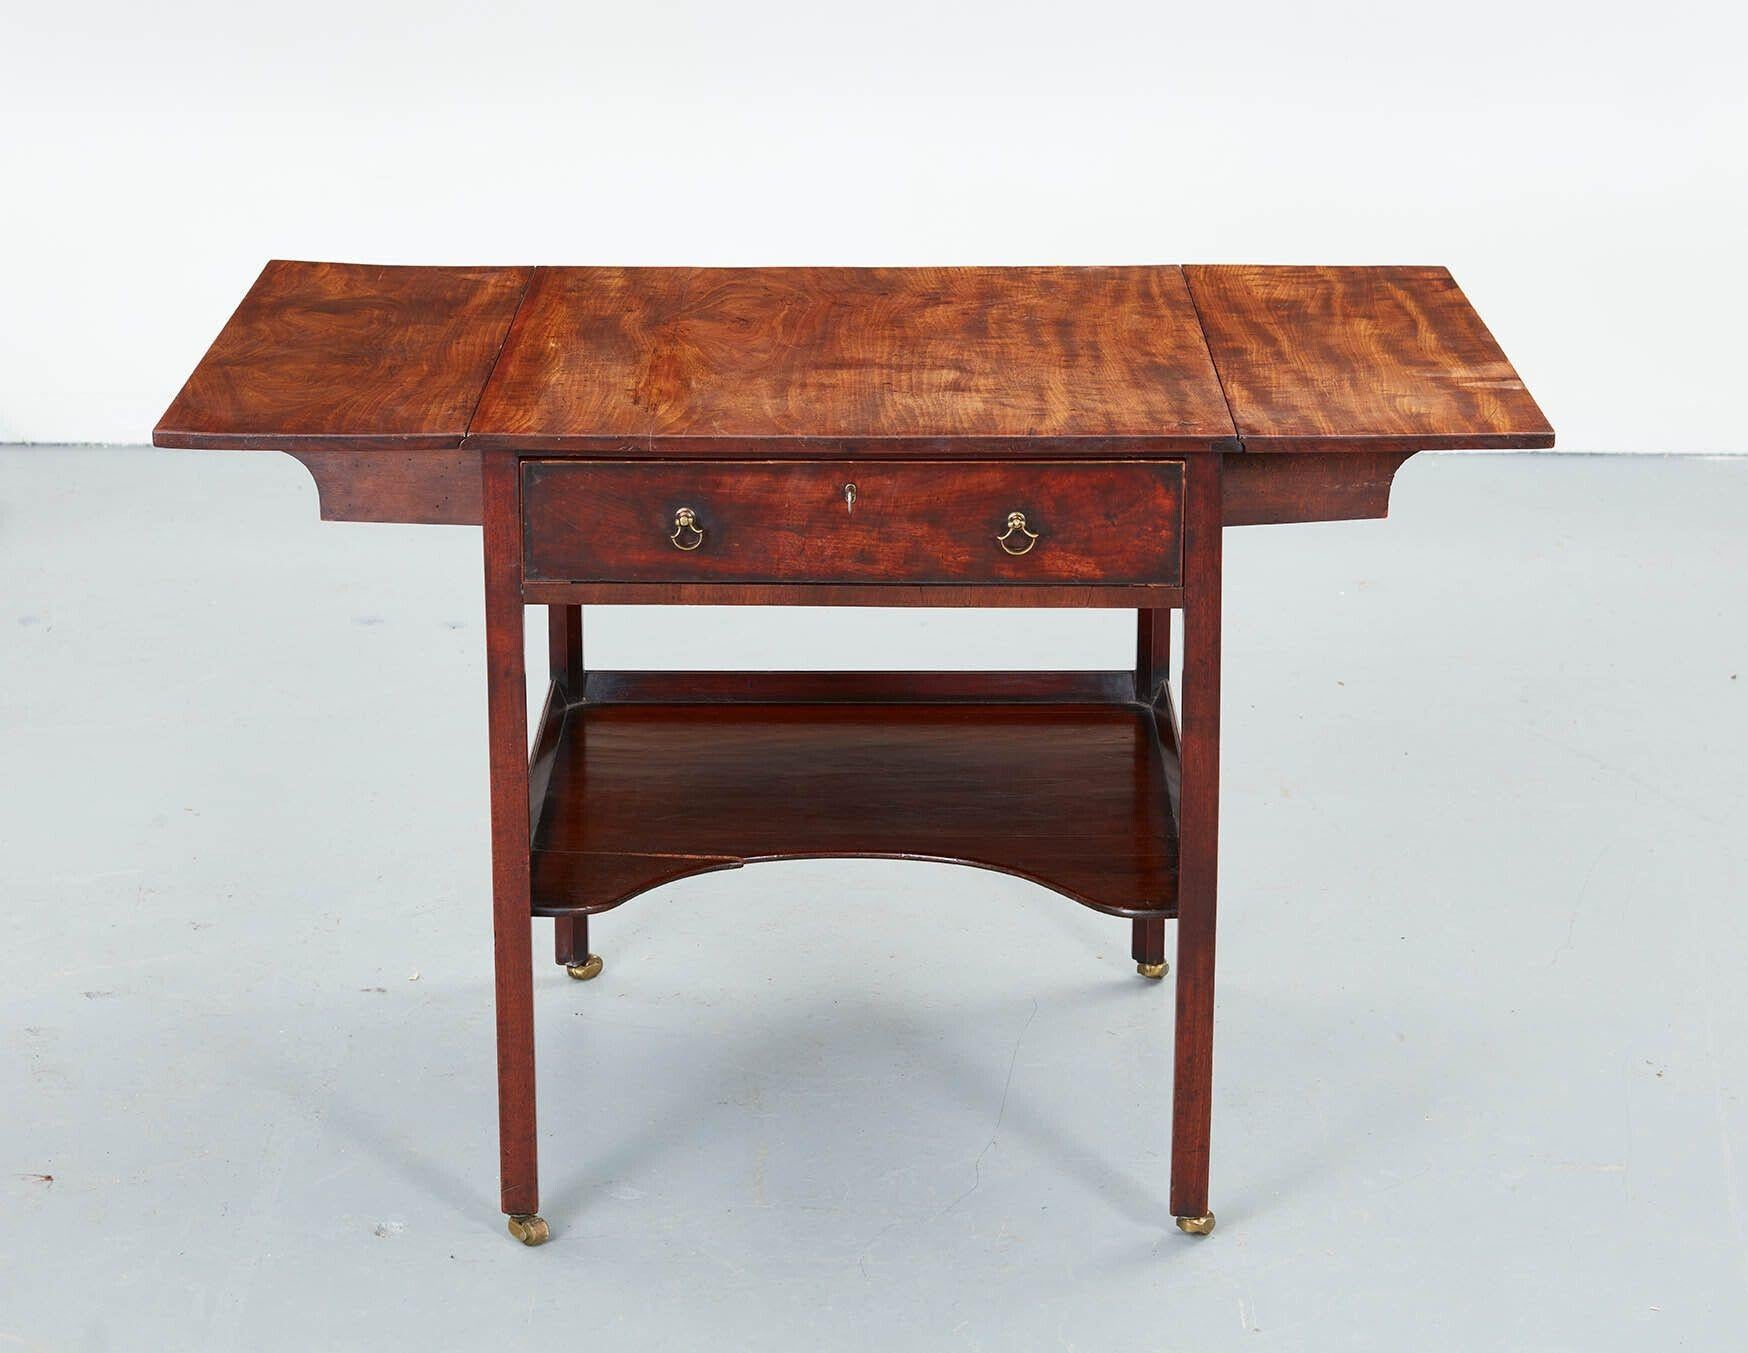 English Pembroke/Dressing Table Attributed to Thomas Chippendale